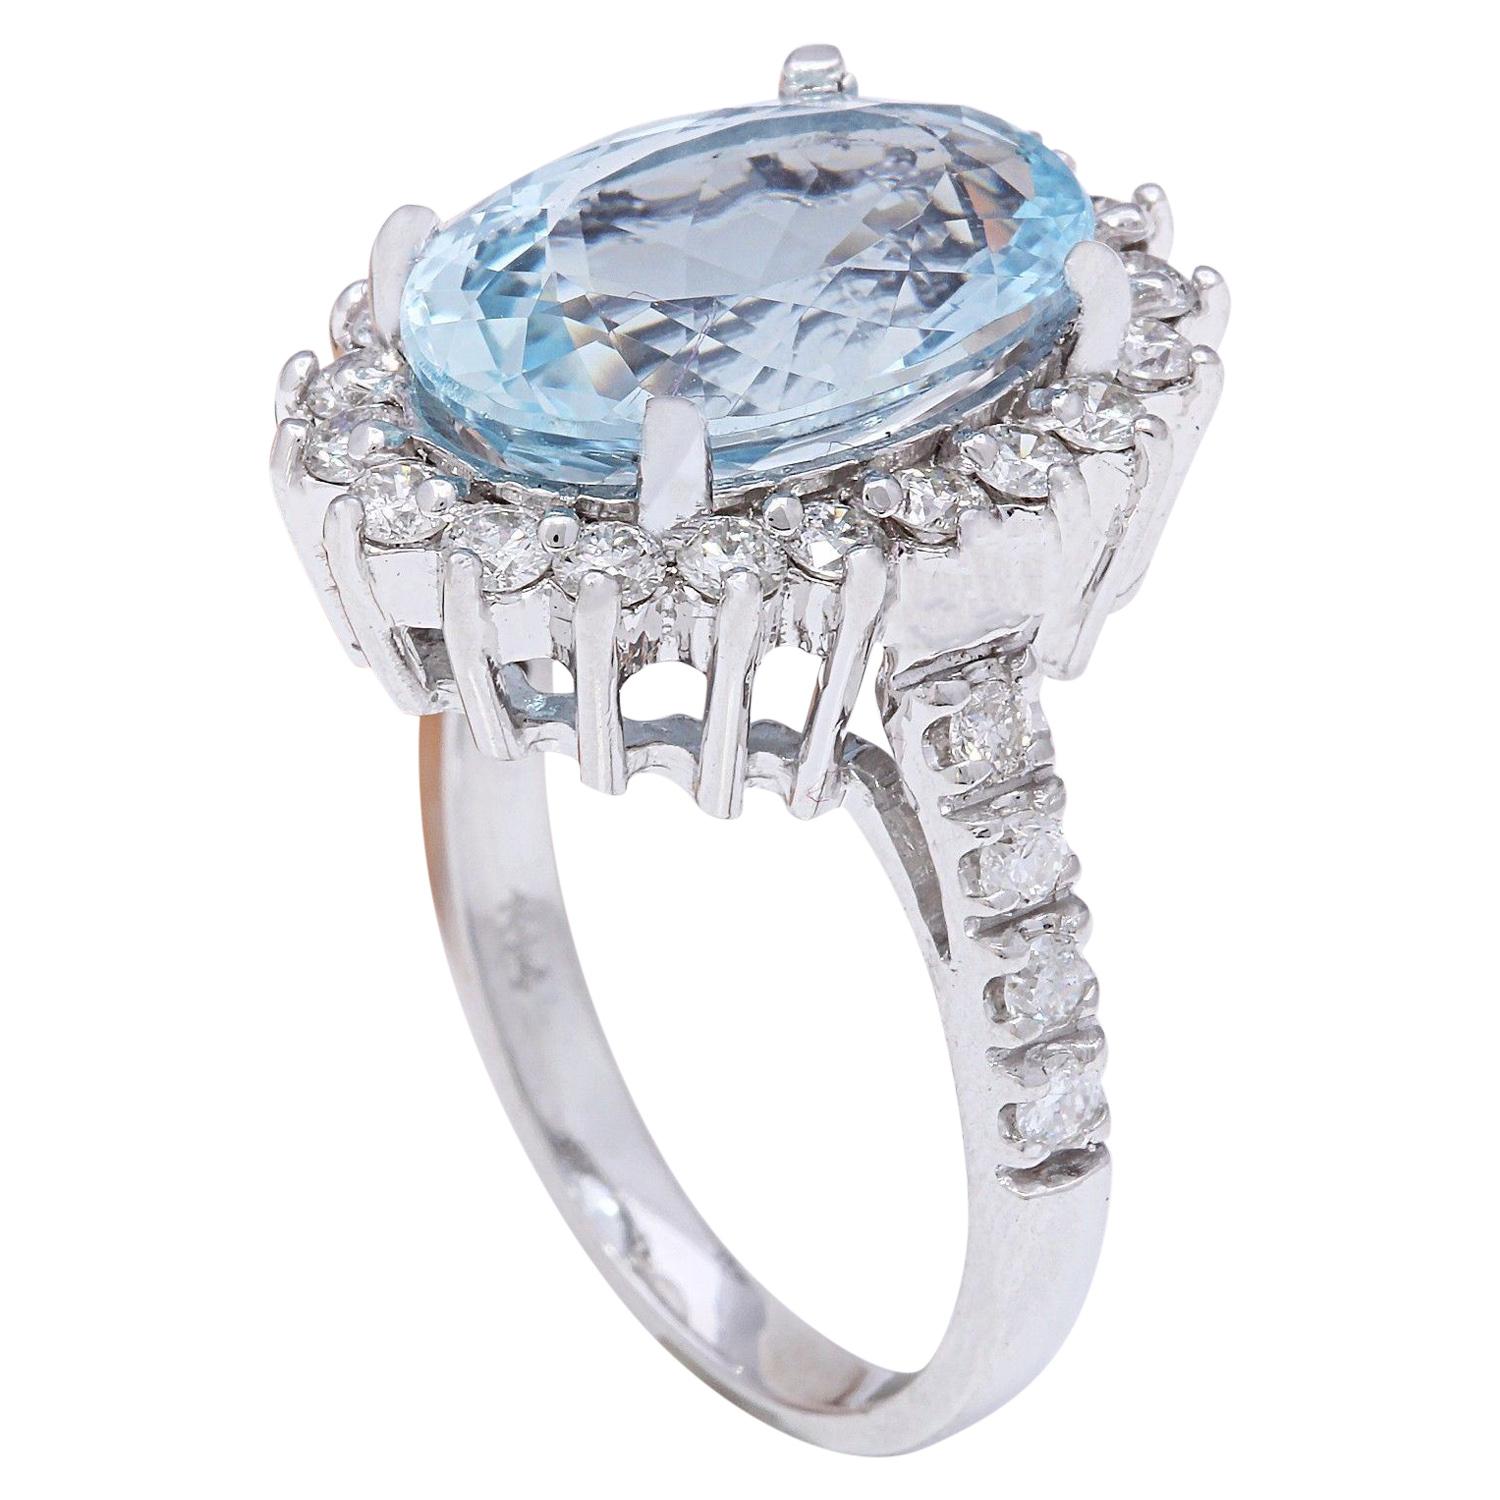 Oval Cut Exquisite Natural Aquamarine Diamond Ring In 14 Karat Solid White Gold  For Sale